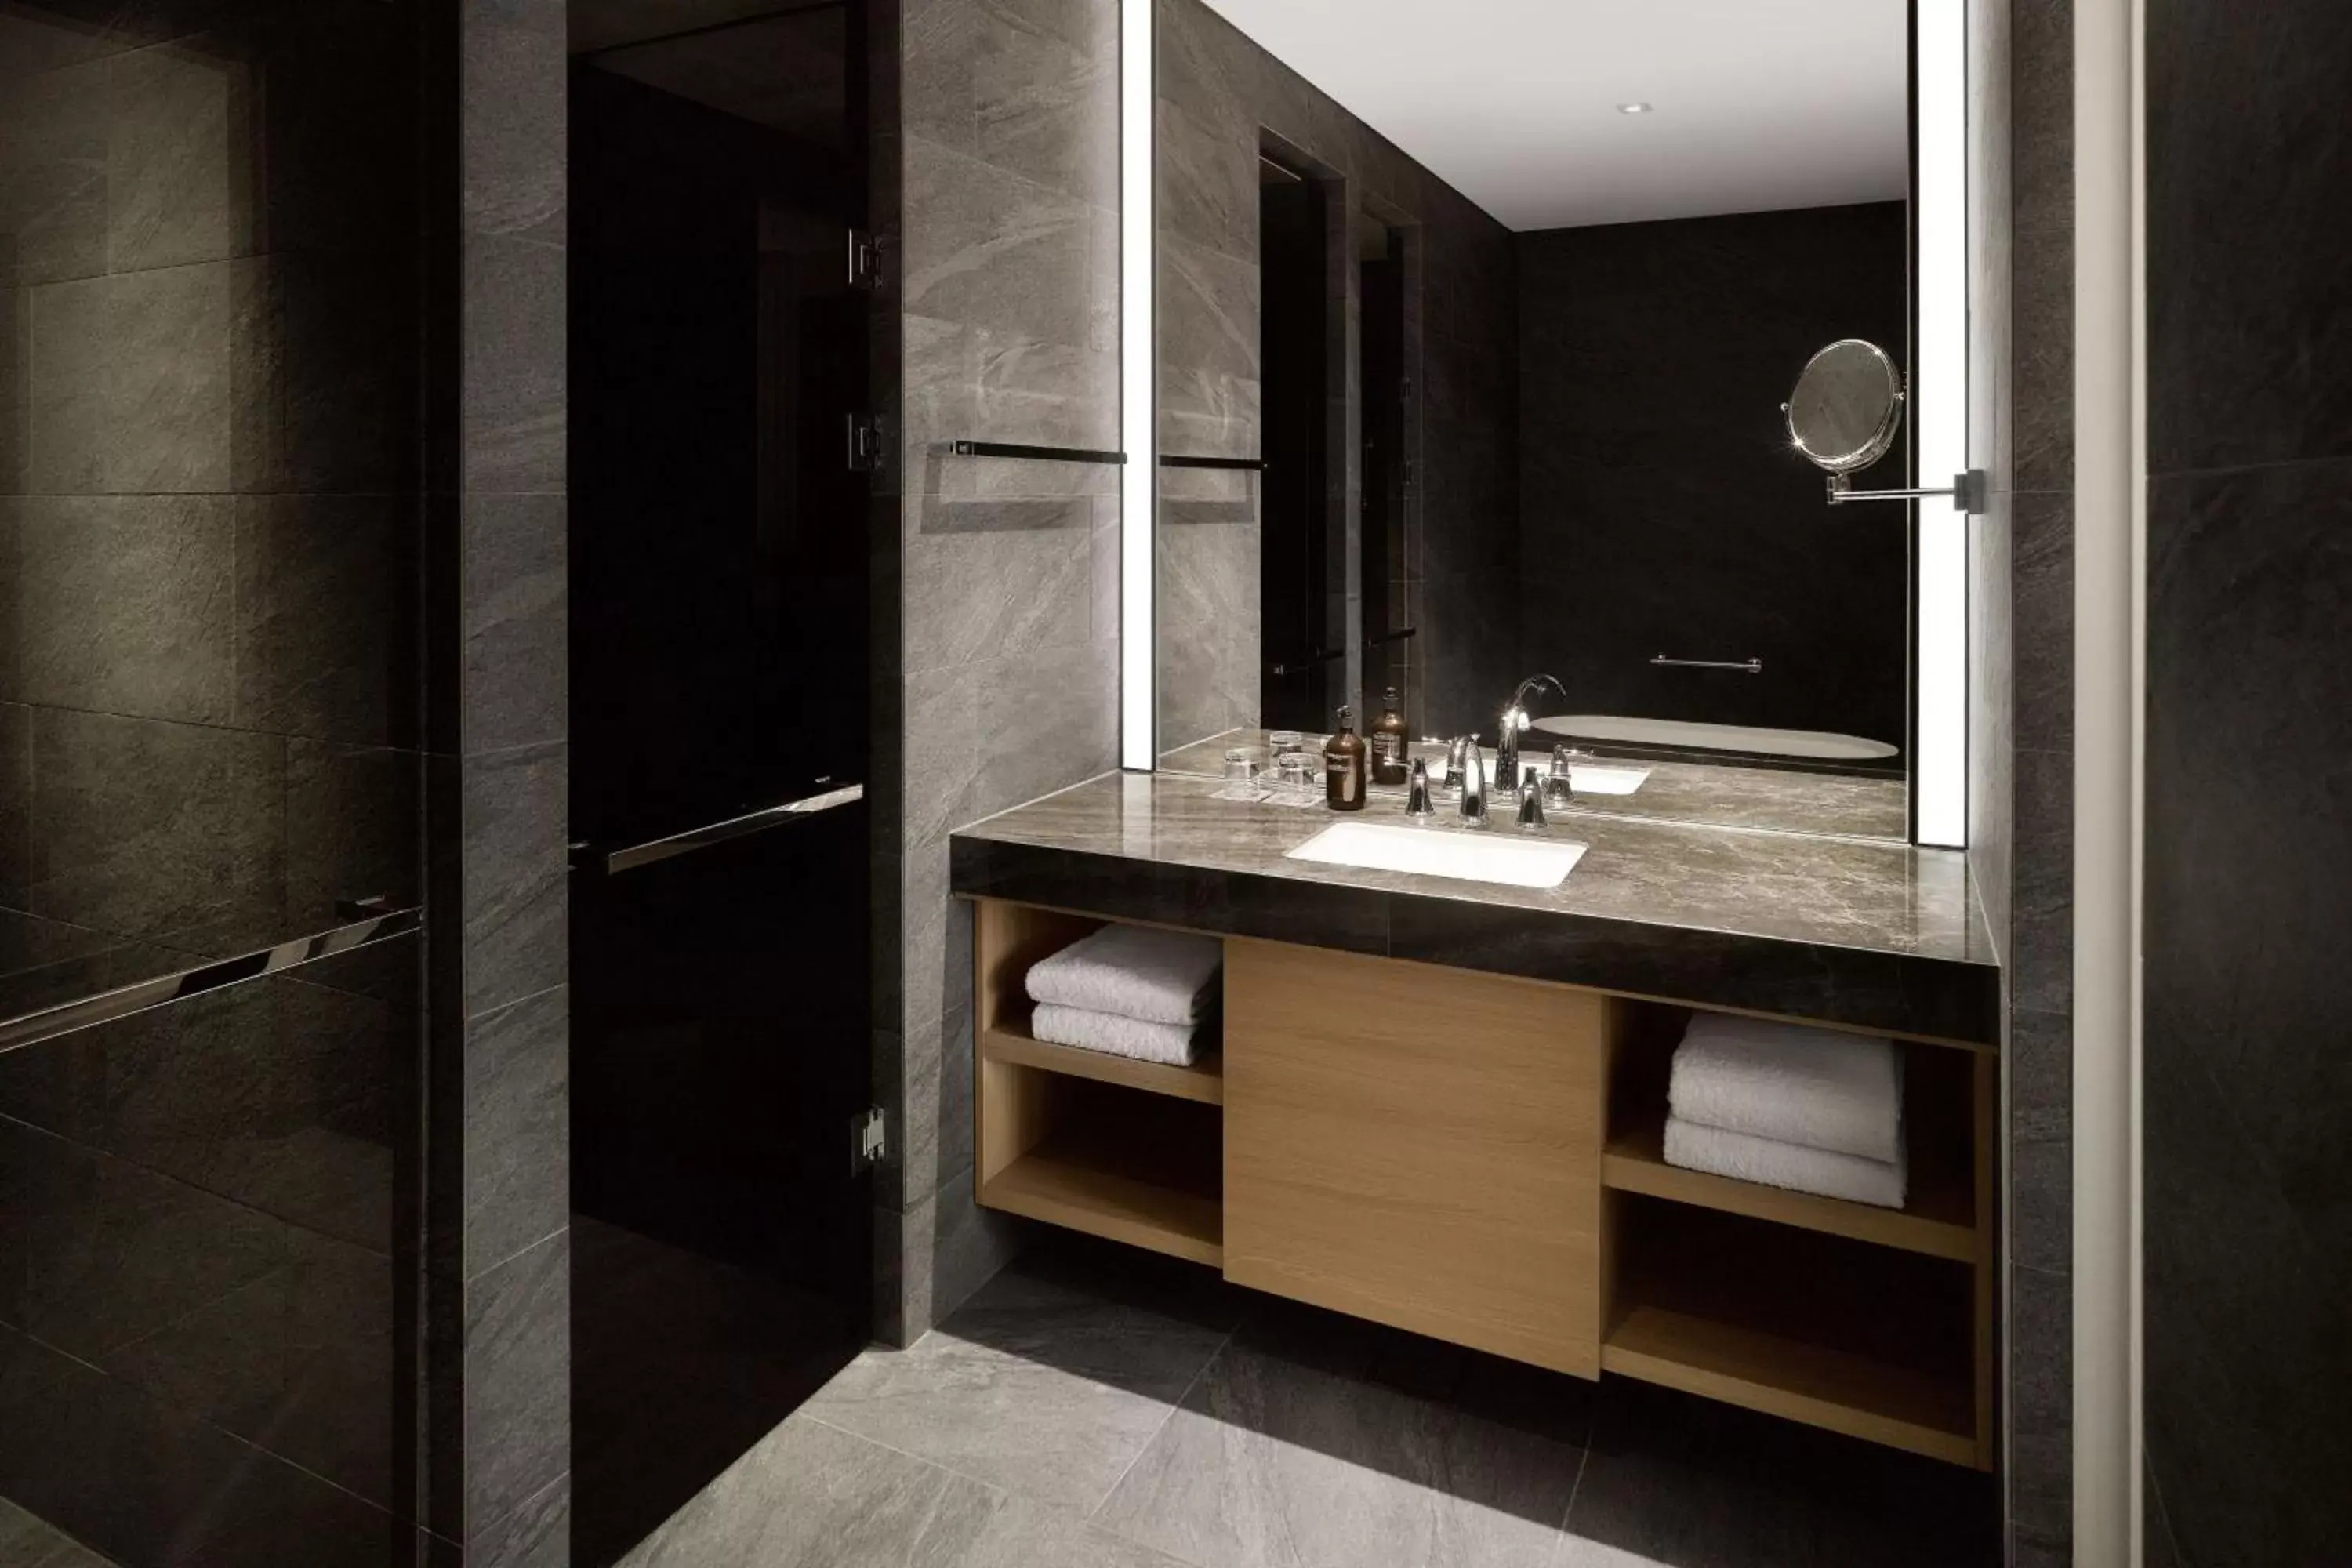 Bathroom in Hotel Onoma, Daejeon, Autograph Collection